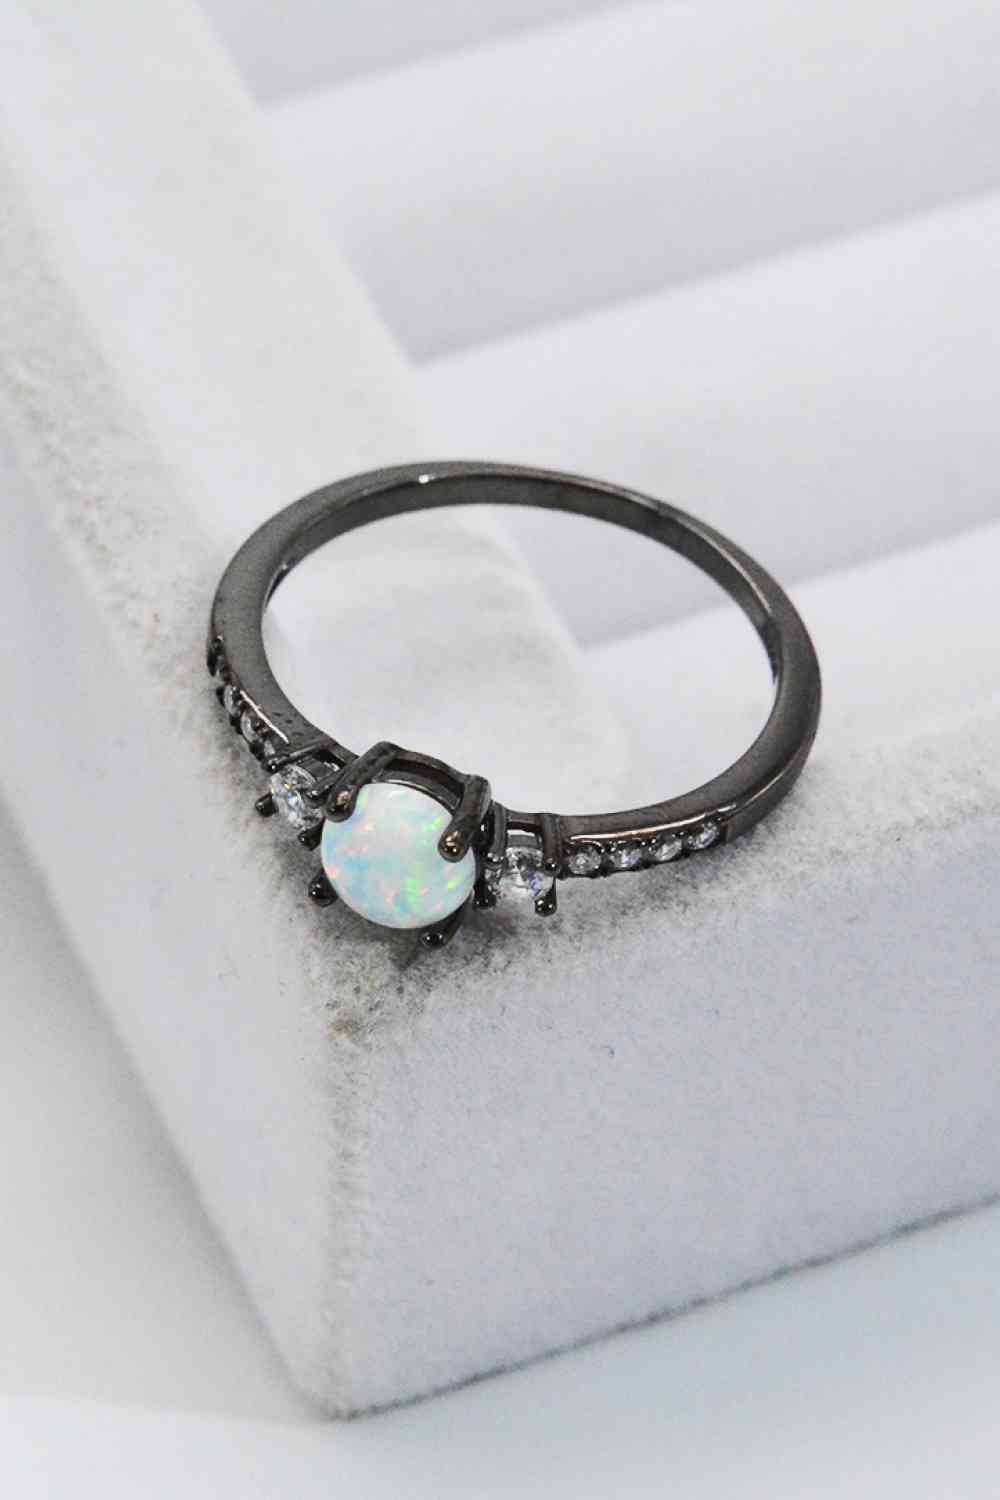 925 Sterling Silver Round Opal Ring